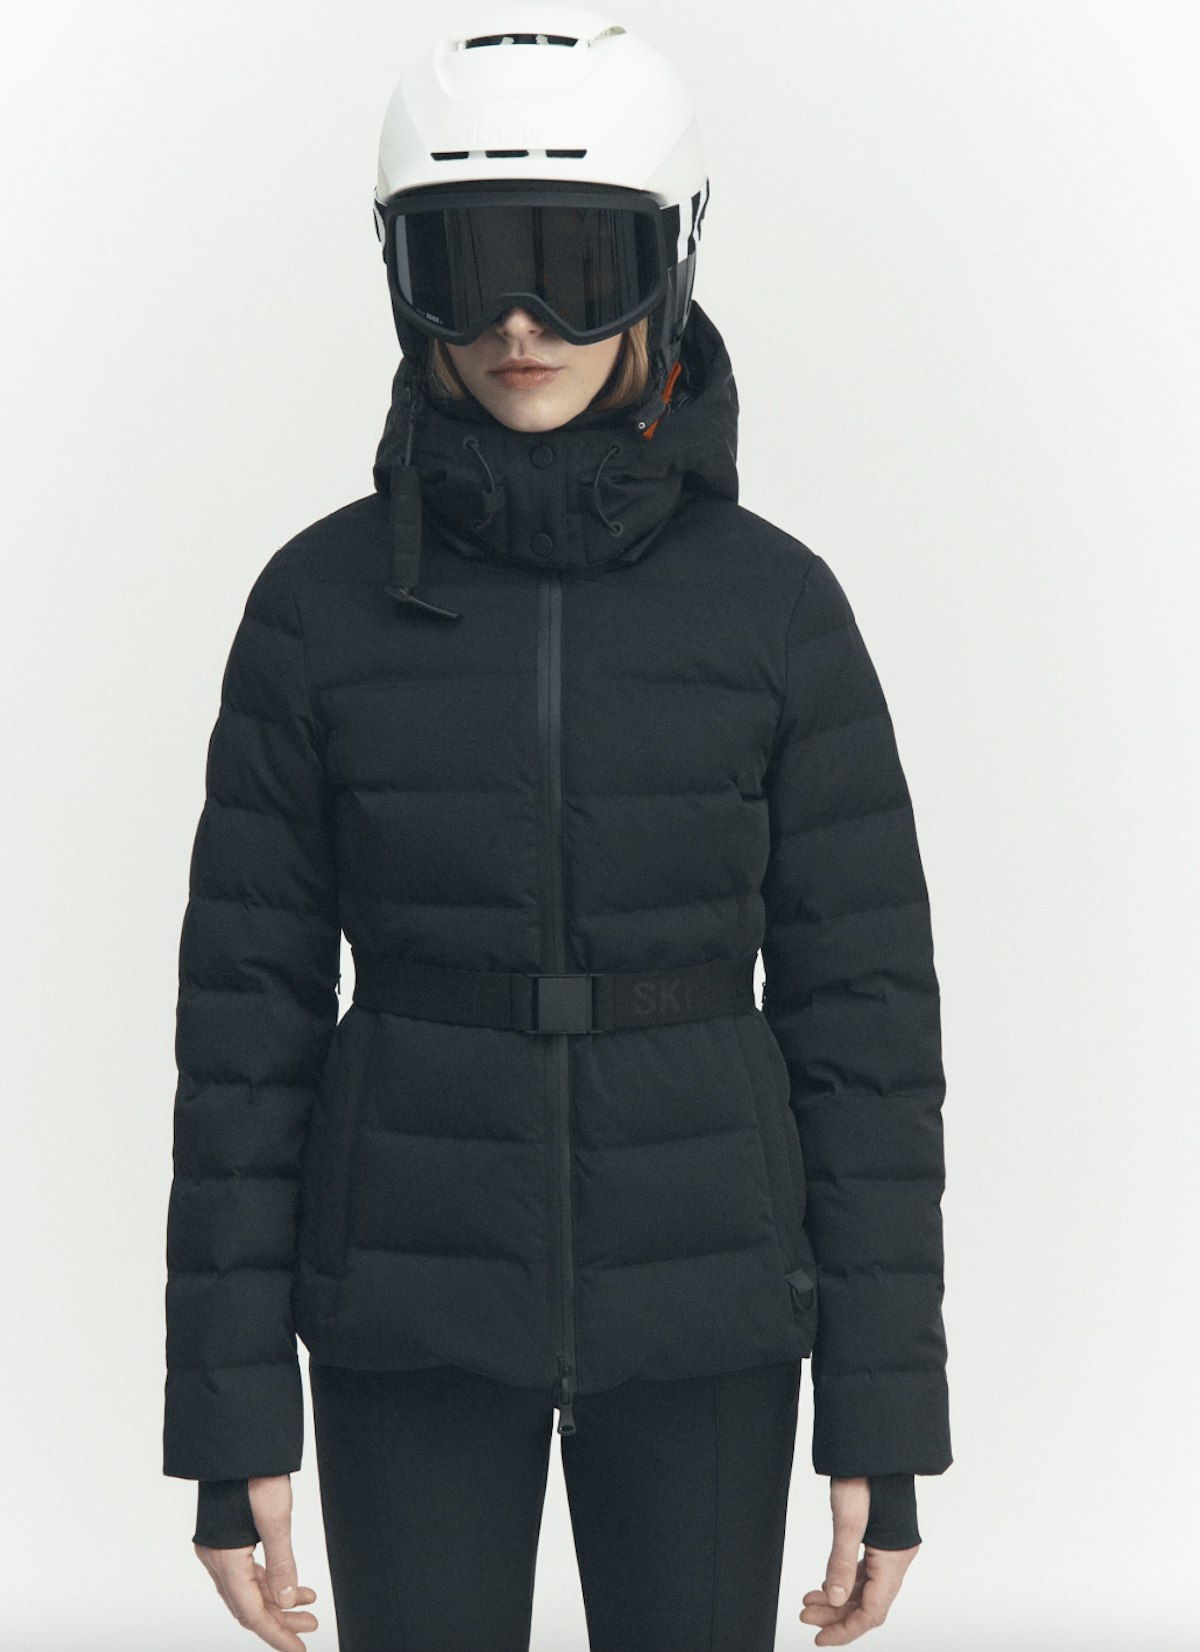 Zara's 2023 Skiwear Collection Is Iconic And Currently On Sale | Grazia ...